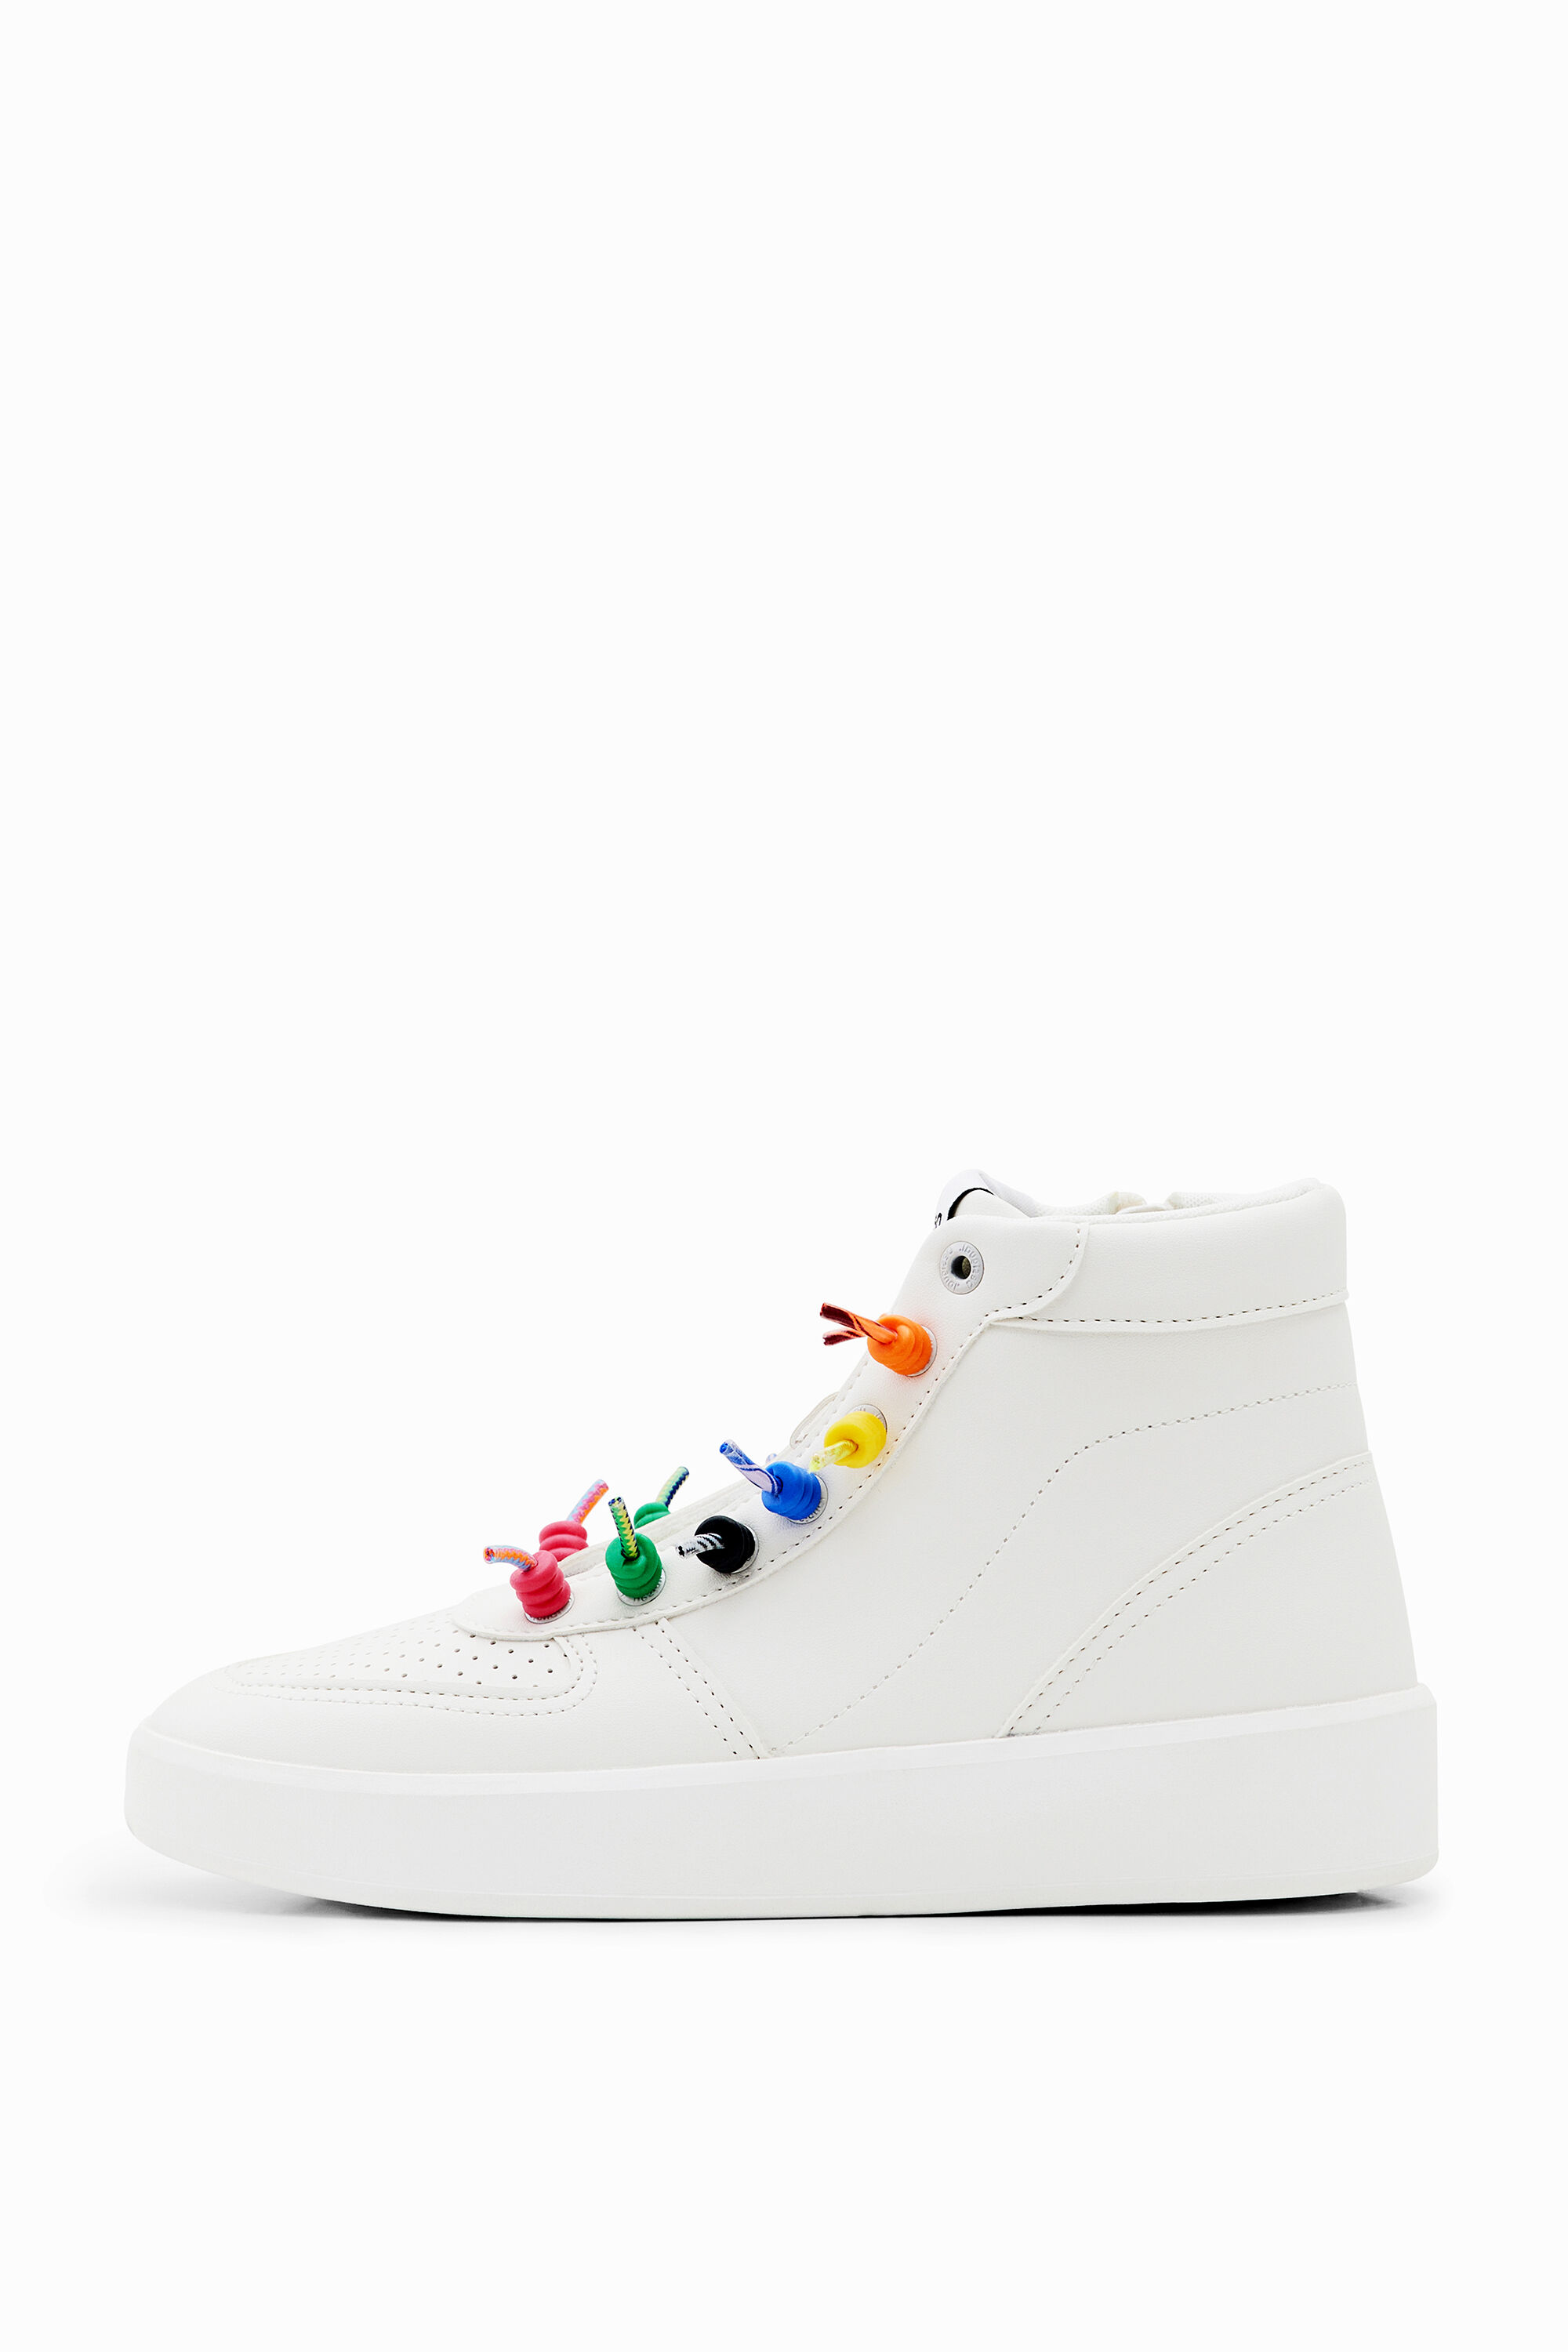 Rainbow lace high-top sneakers - WHITE - 39